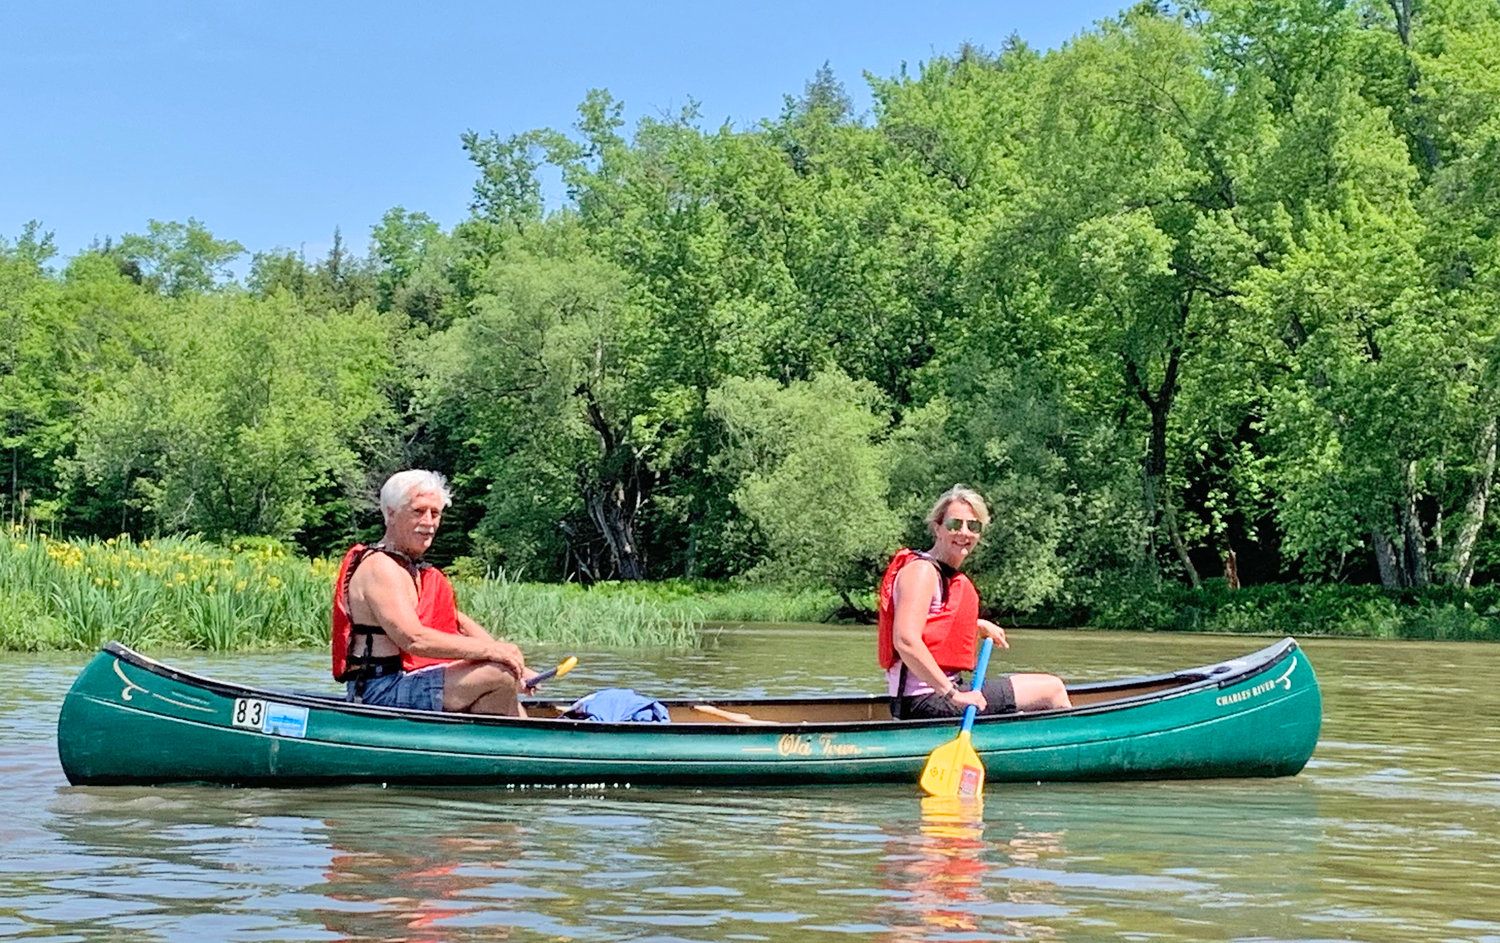 Grandmaster Clifford Crandall Jr. and his wife, Amanda, canoe on the Susquehanna River near Cooperstown in Otsego County.